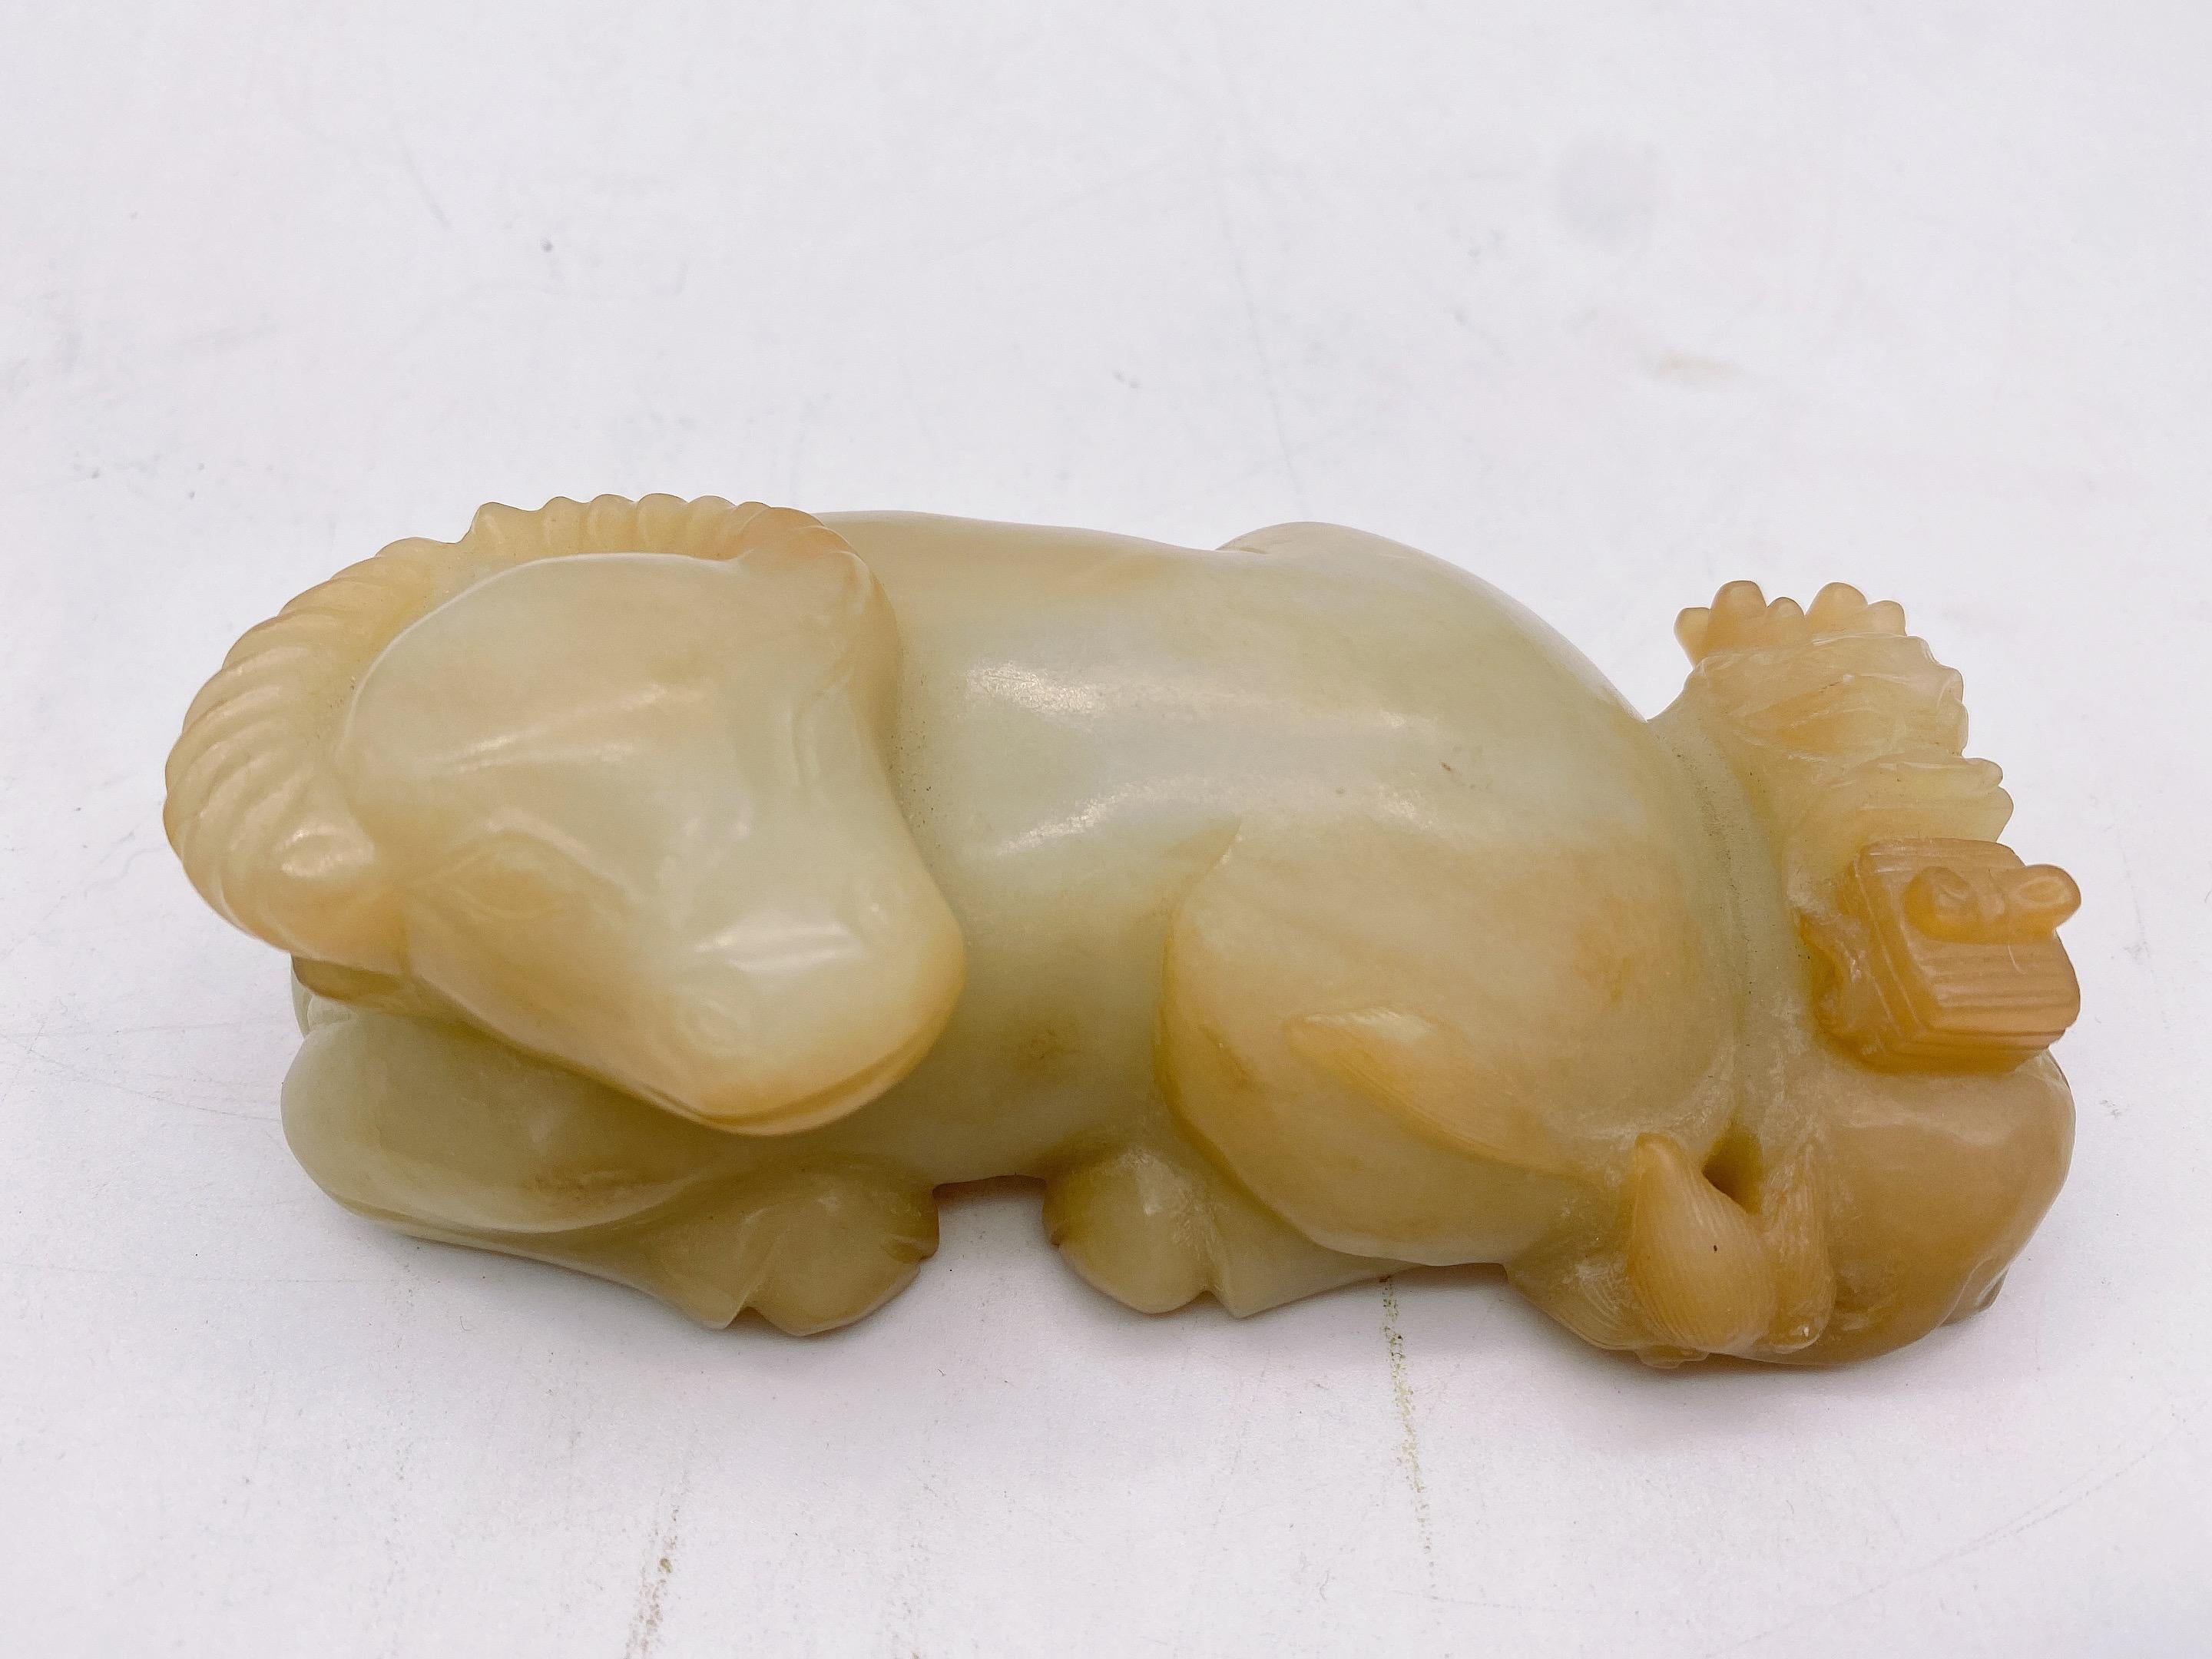 A Qing dynasty Chinese carved jade figure of a bullock. 13 cm x 6cm x 5 cm. weight 600g see more pictures.